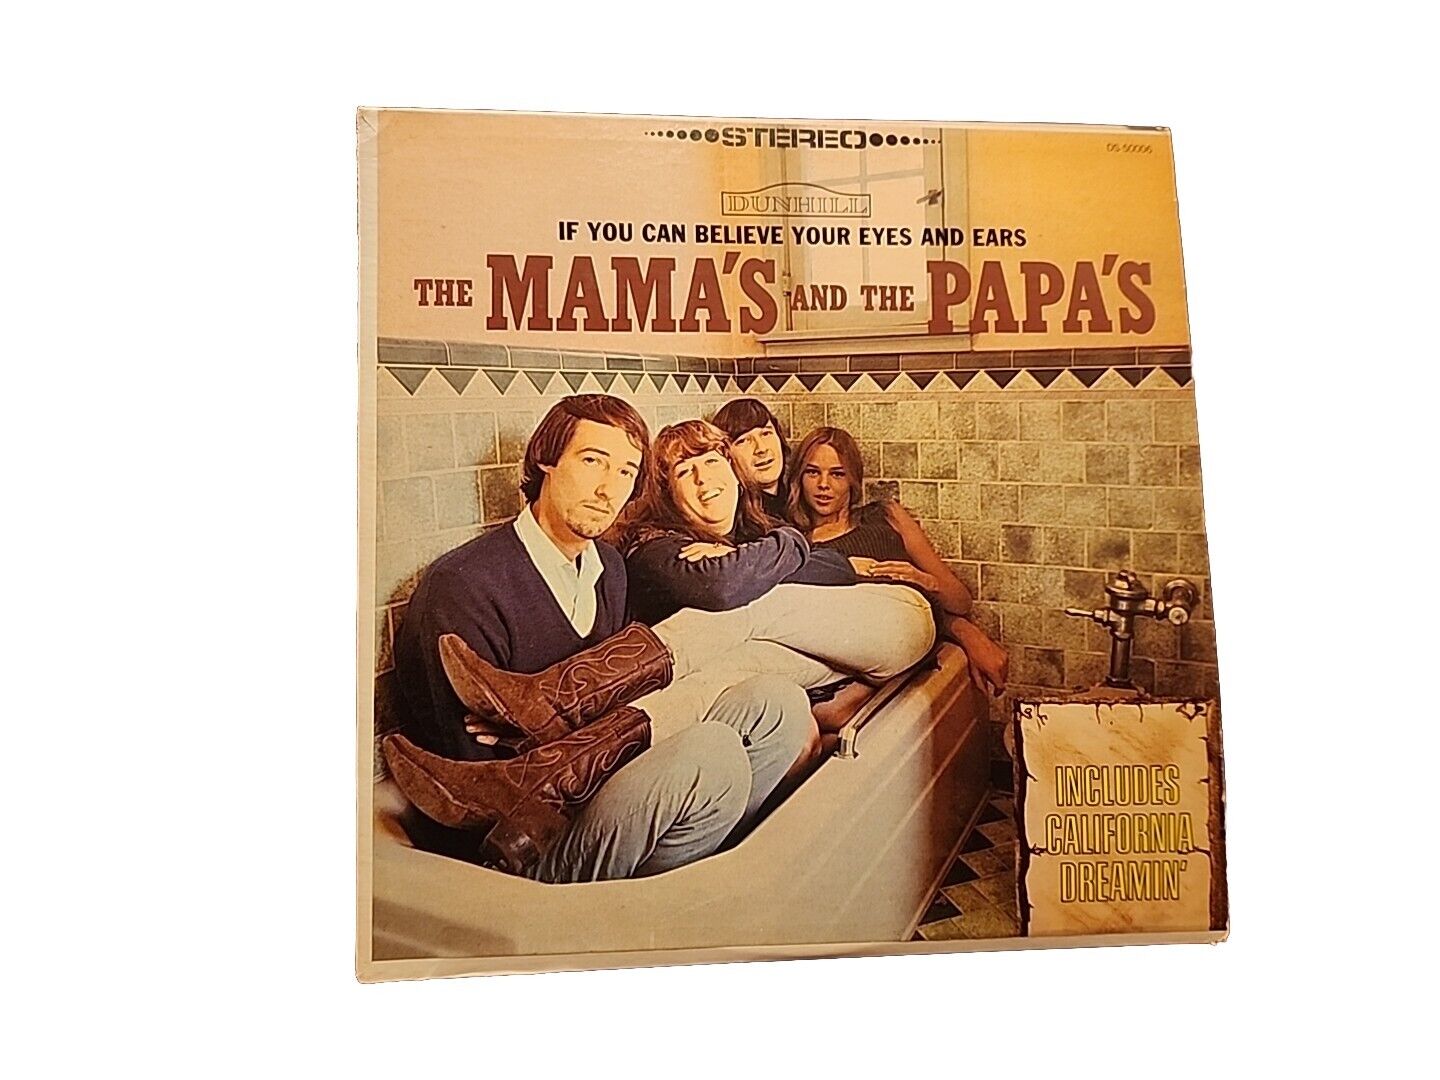 The Mamas and The Papas If You Can Believe Your Eyes And Ears LP Vinyl Record 